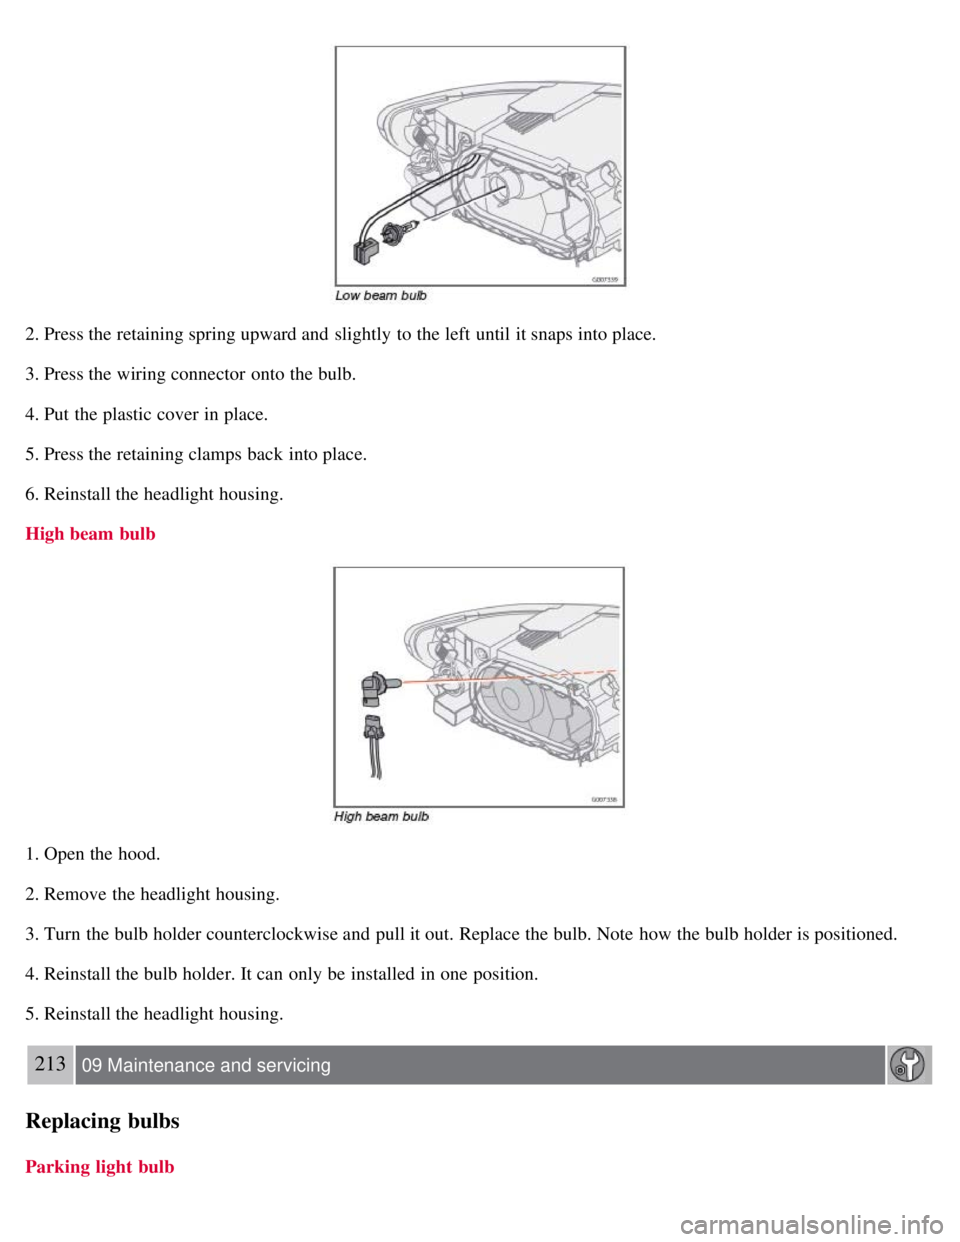 VOLVO C30 2008  Owners Manual 2. Press the retaining spring upward and  slightly  to the left until it snaps into place.
3. Press the wiring connector  onto the bulb.
4. Put the plastic cover in place.
5. Press the retaining clamp